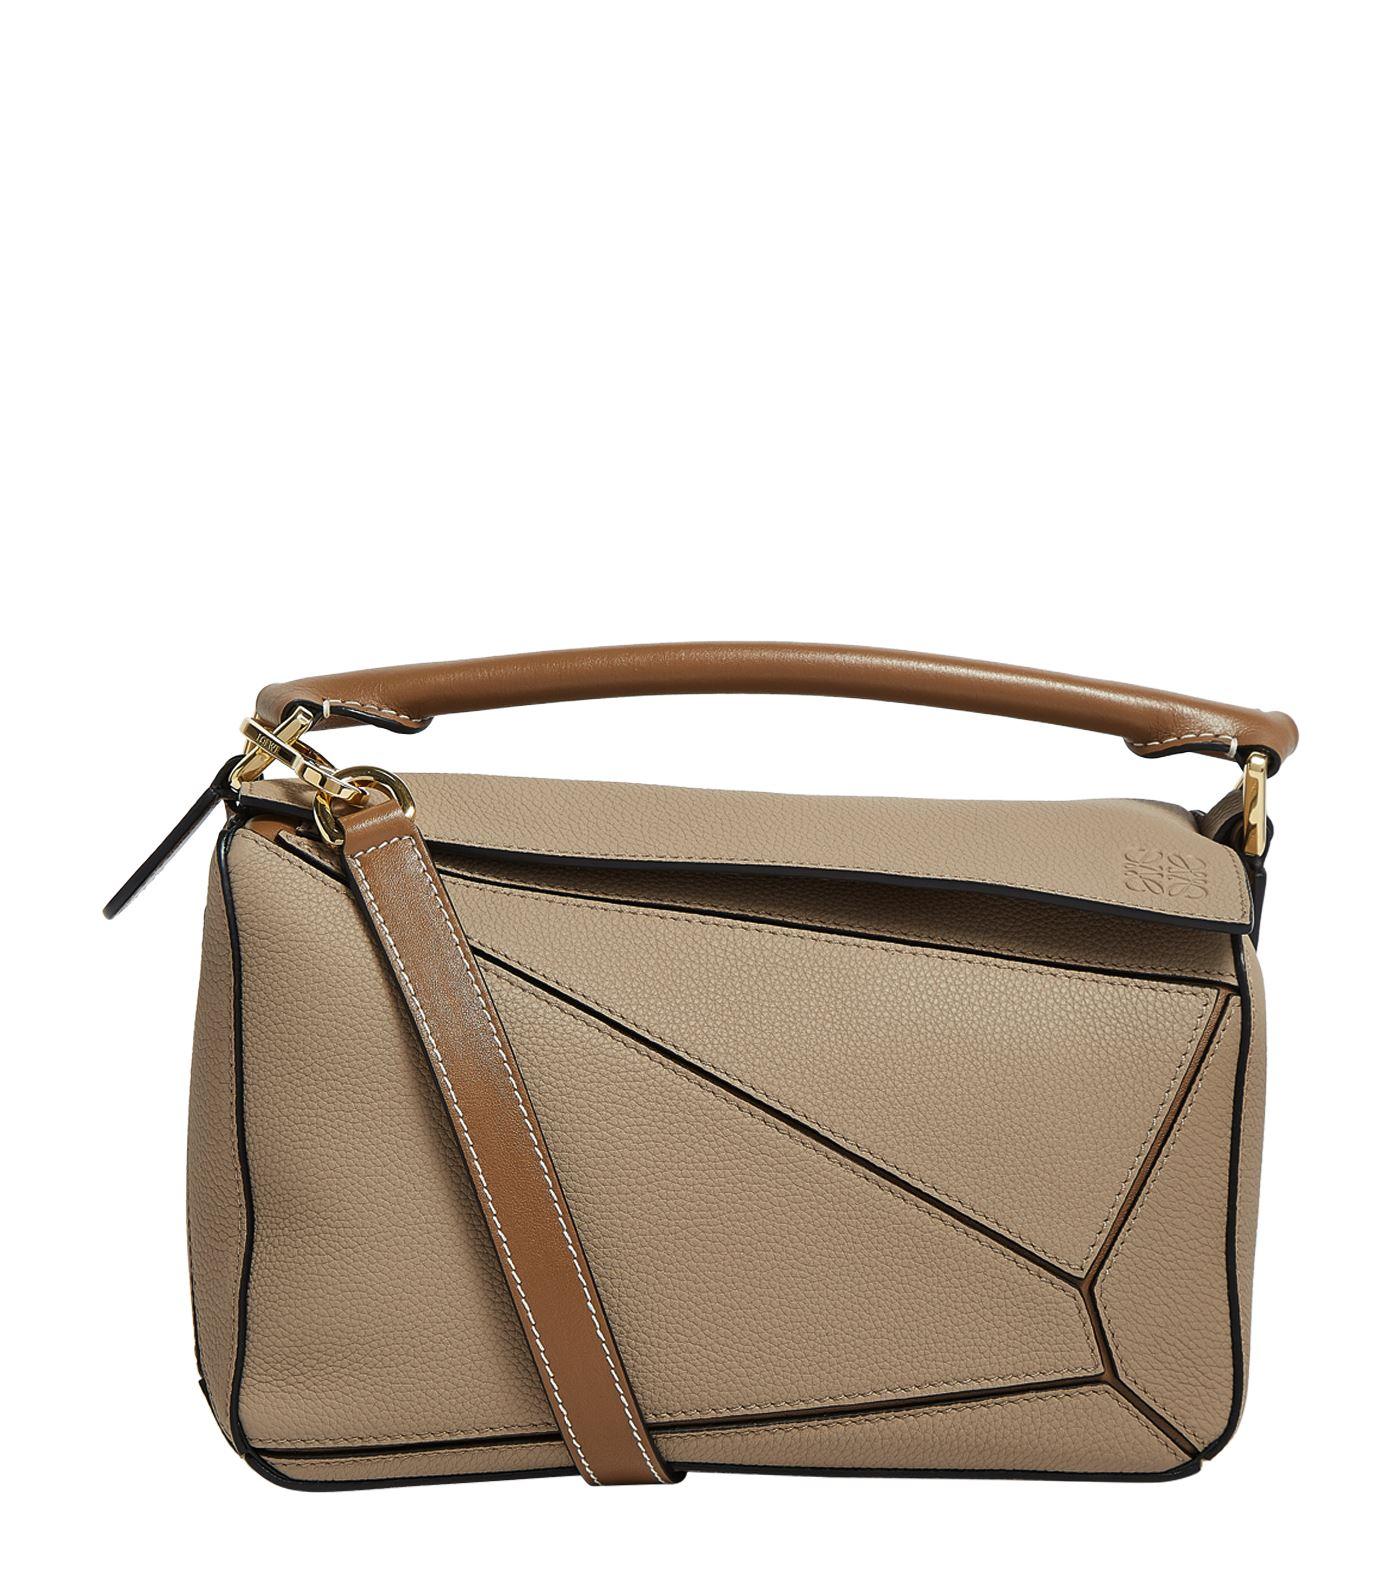 Lyst - Loewe Small Leather Puzzle Bag in Natural